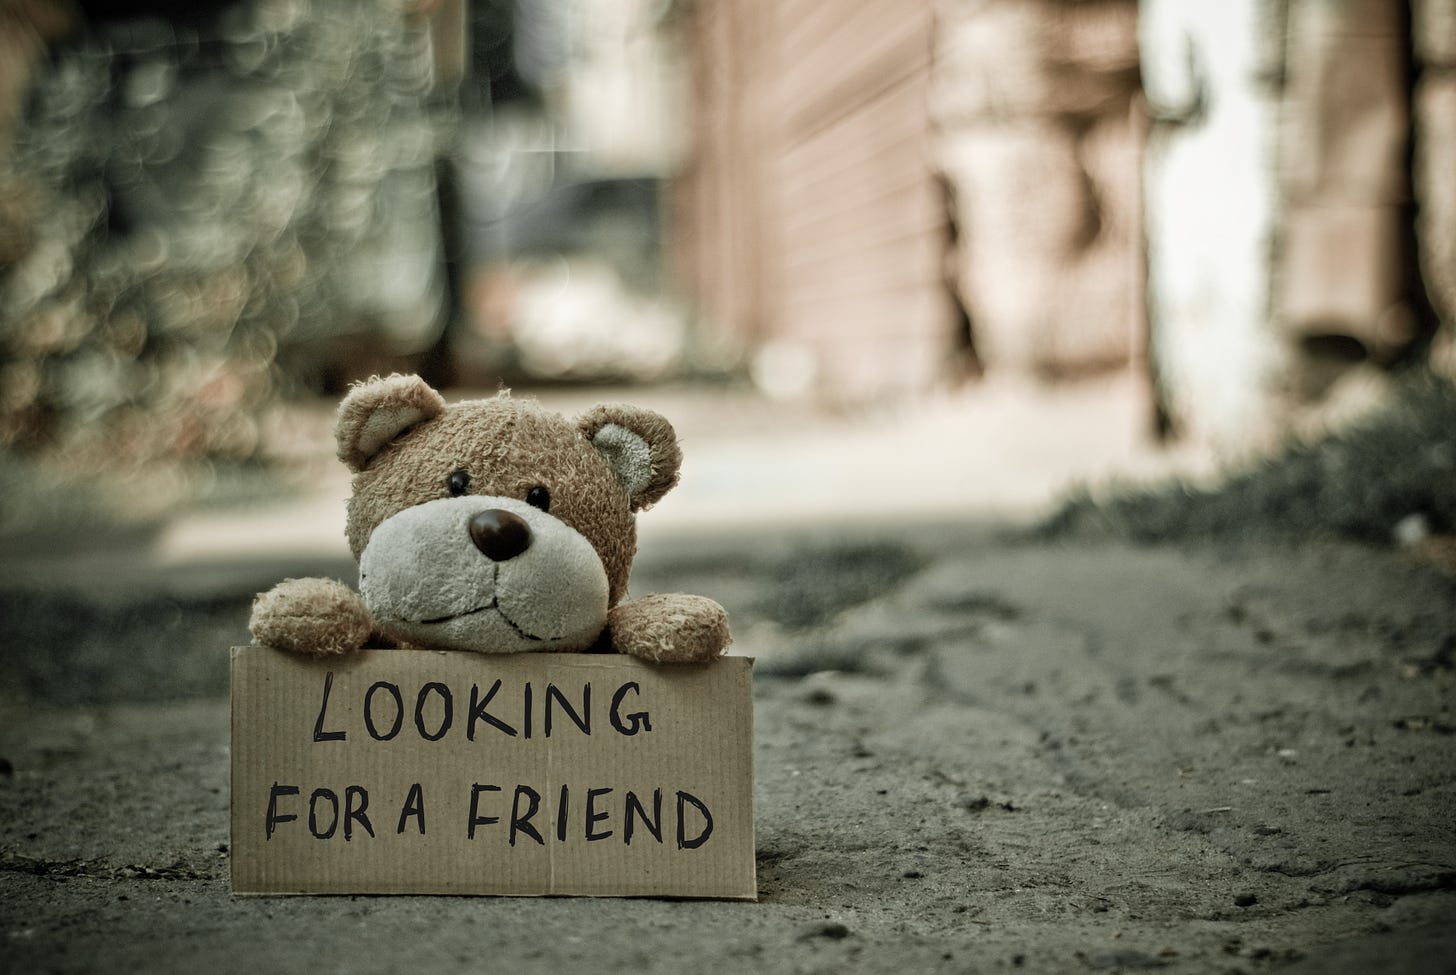 A teddy bear holding a sign that says "Looking for a friend."